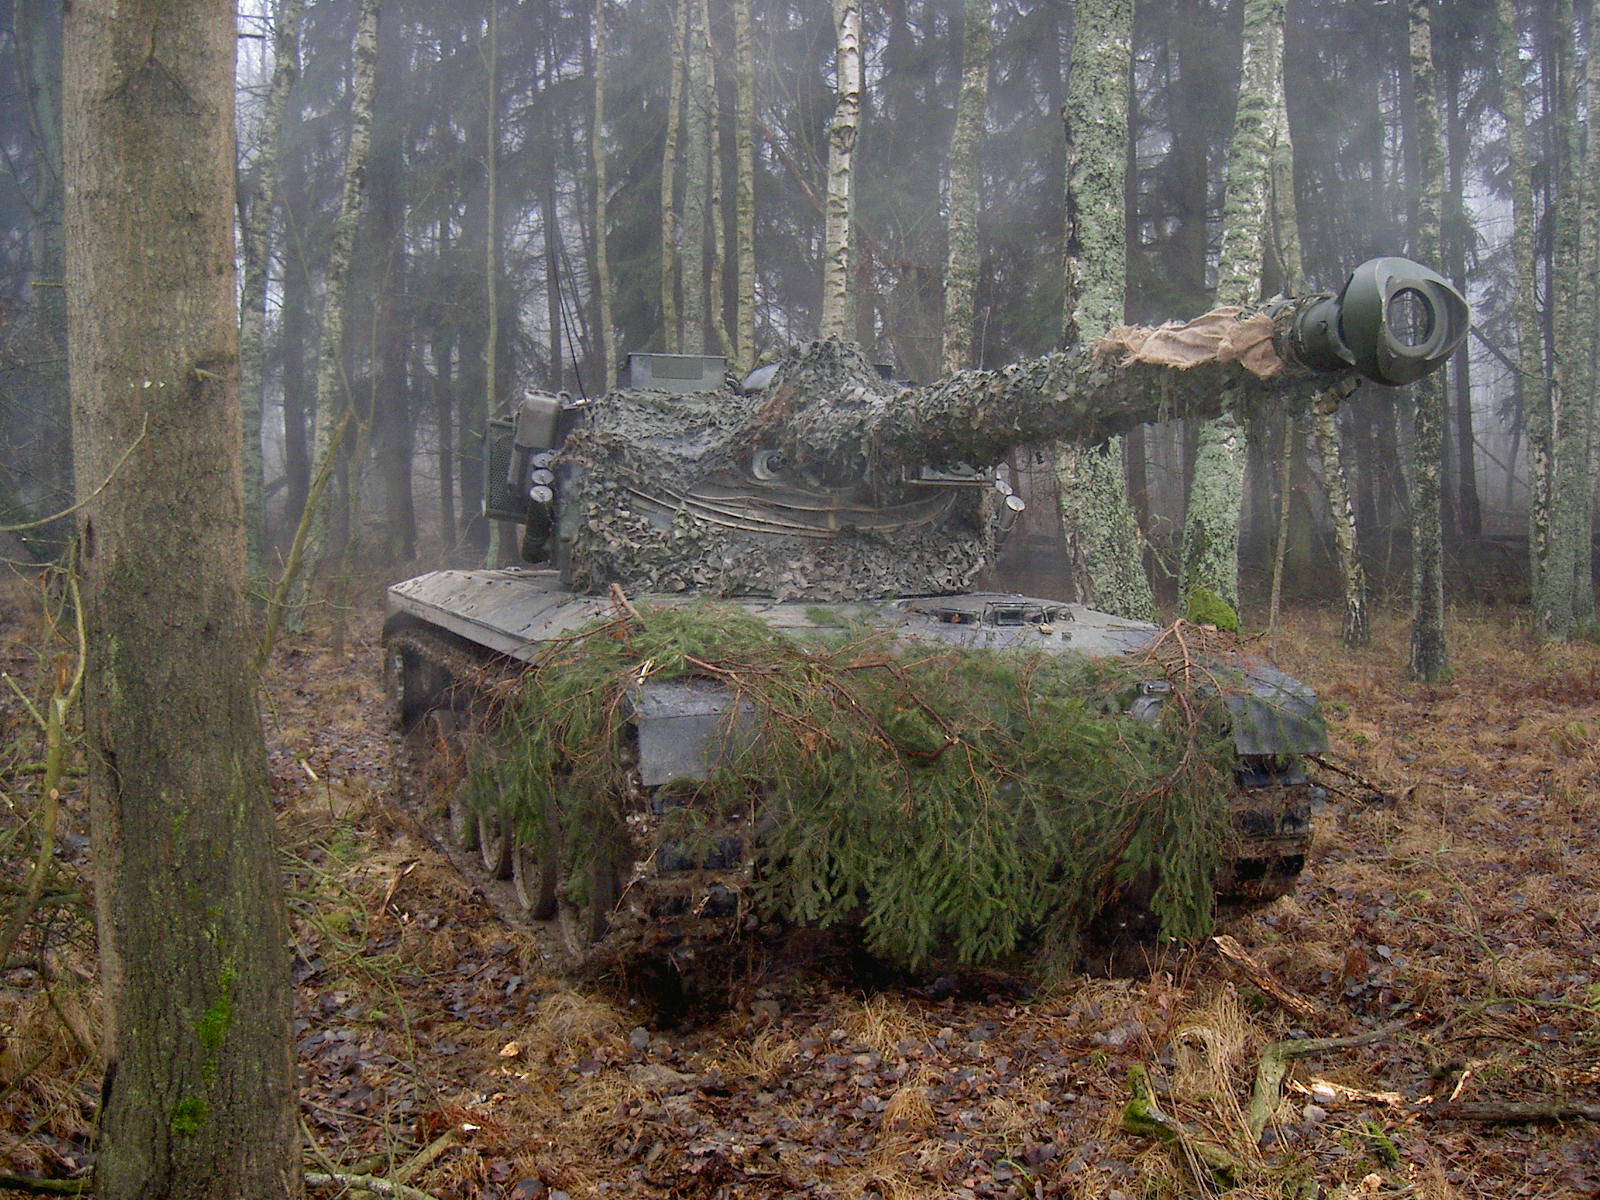 Military Tanks In The Woods